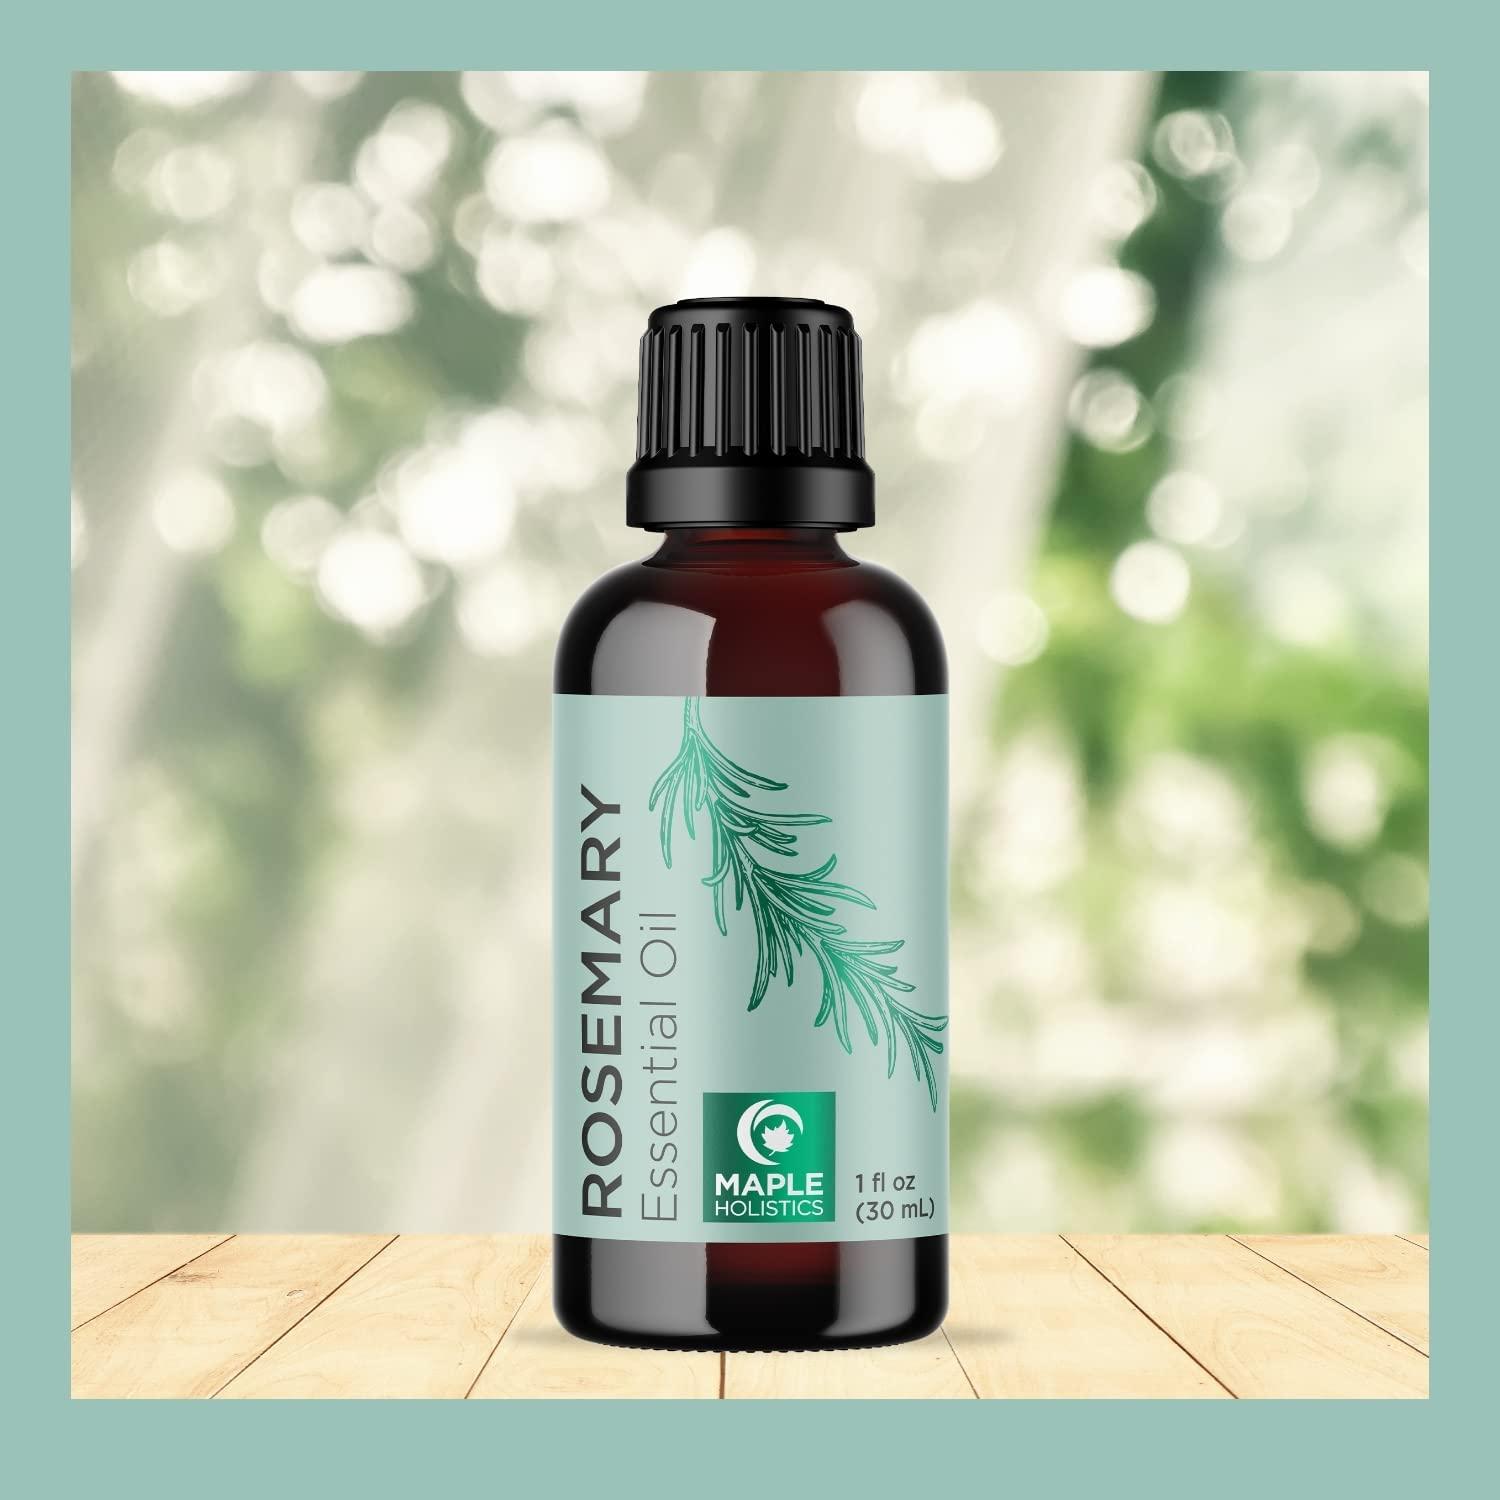 Pure Rosemary Essential Oil for Aromatherapy - Pure Rosemary Oil for Hair Skin and Nails - Refreshing Rosemary Essential Oil for Diffusers Plus Dry